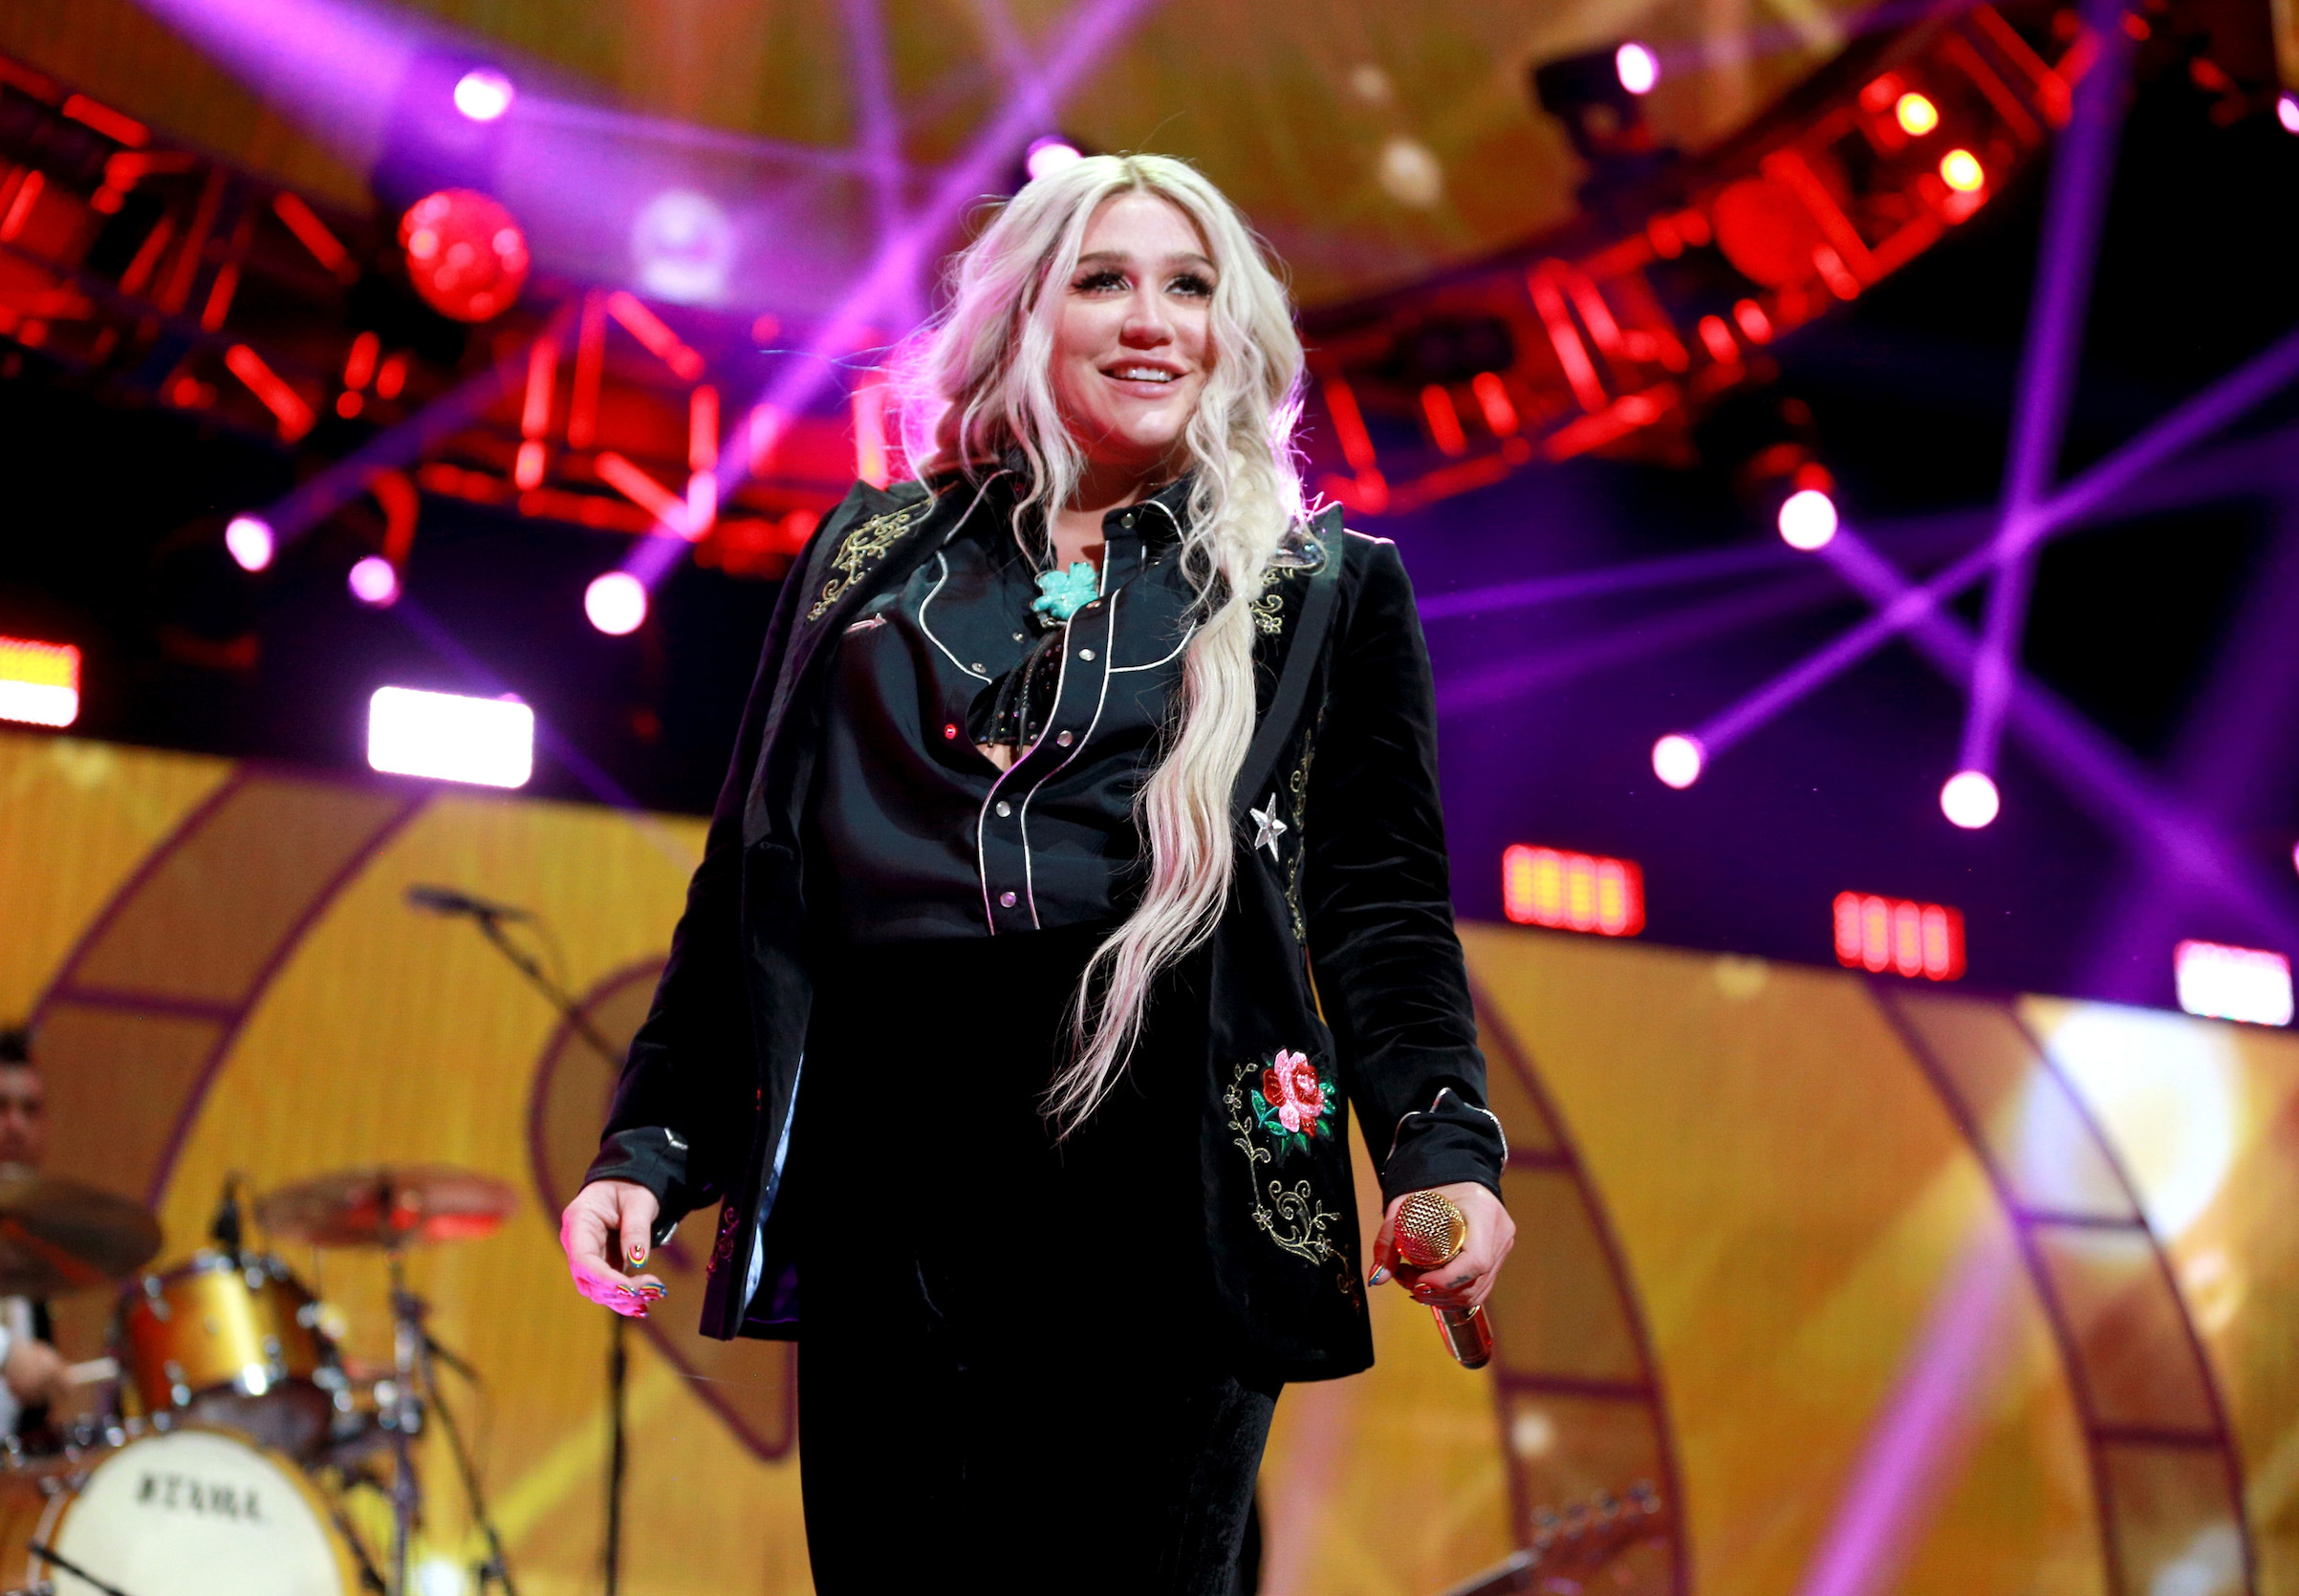 Kesha performs onstage during the 2017 iHeartRadio Music Festival on Sept. 23, 2017 in Las Vegas, Nevada. (Rich Fury&mdash;iHeartMedia/Getty Images)